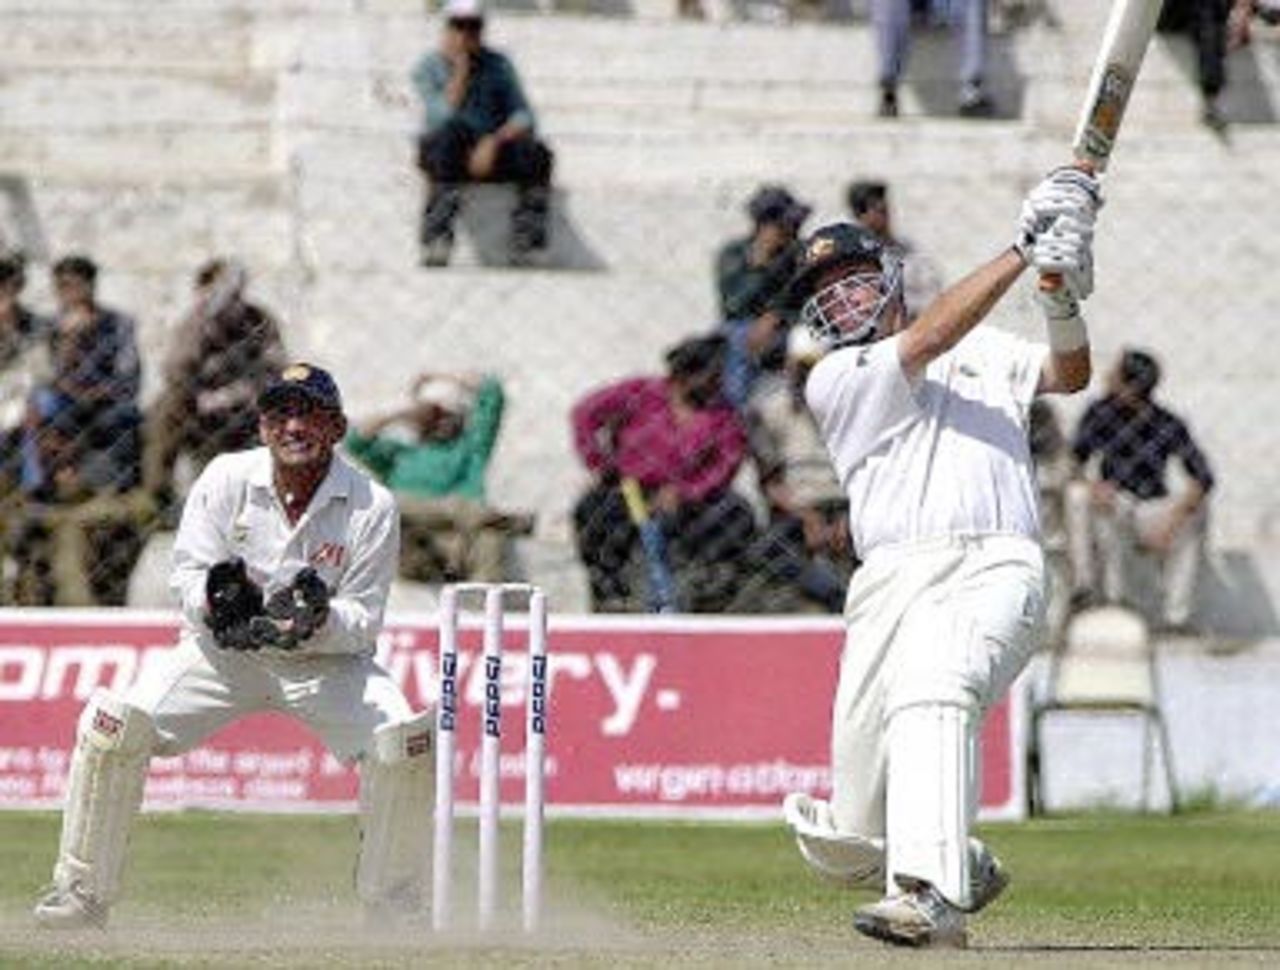 Australia's top scorer Mark Waugh hits a ball for six runs on his way to 150 during their second innings during a three-day match against Board President's XI in New Delhi 08 March 2001. Waugh scored 164, but the match ended in a draw.